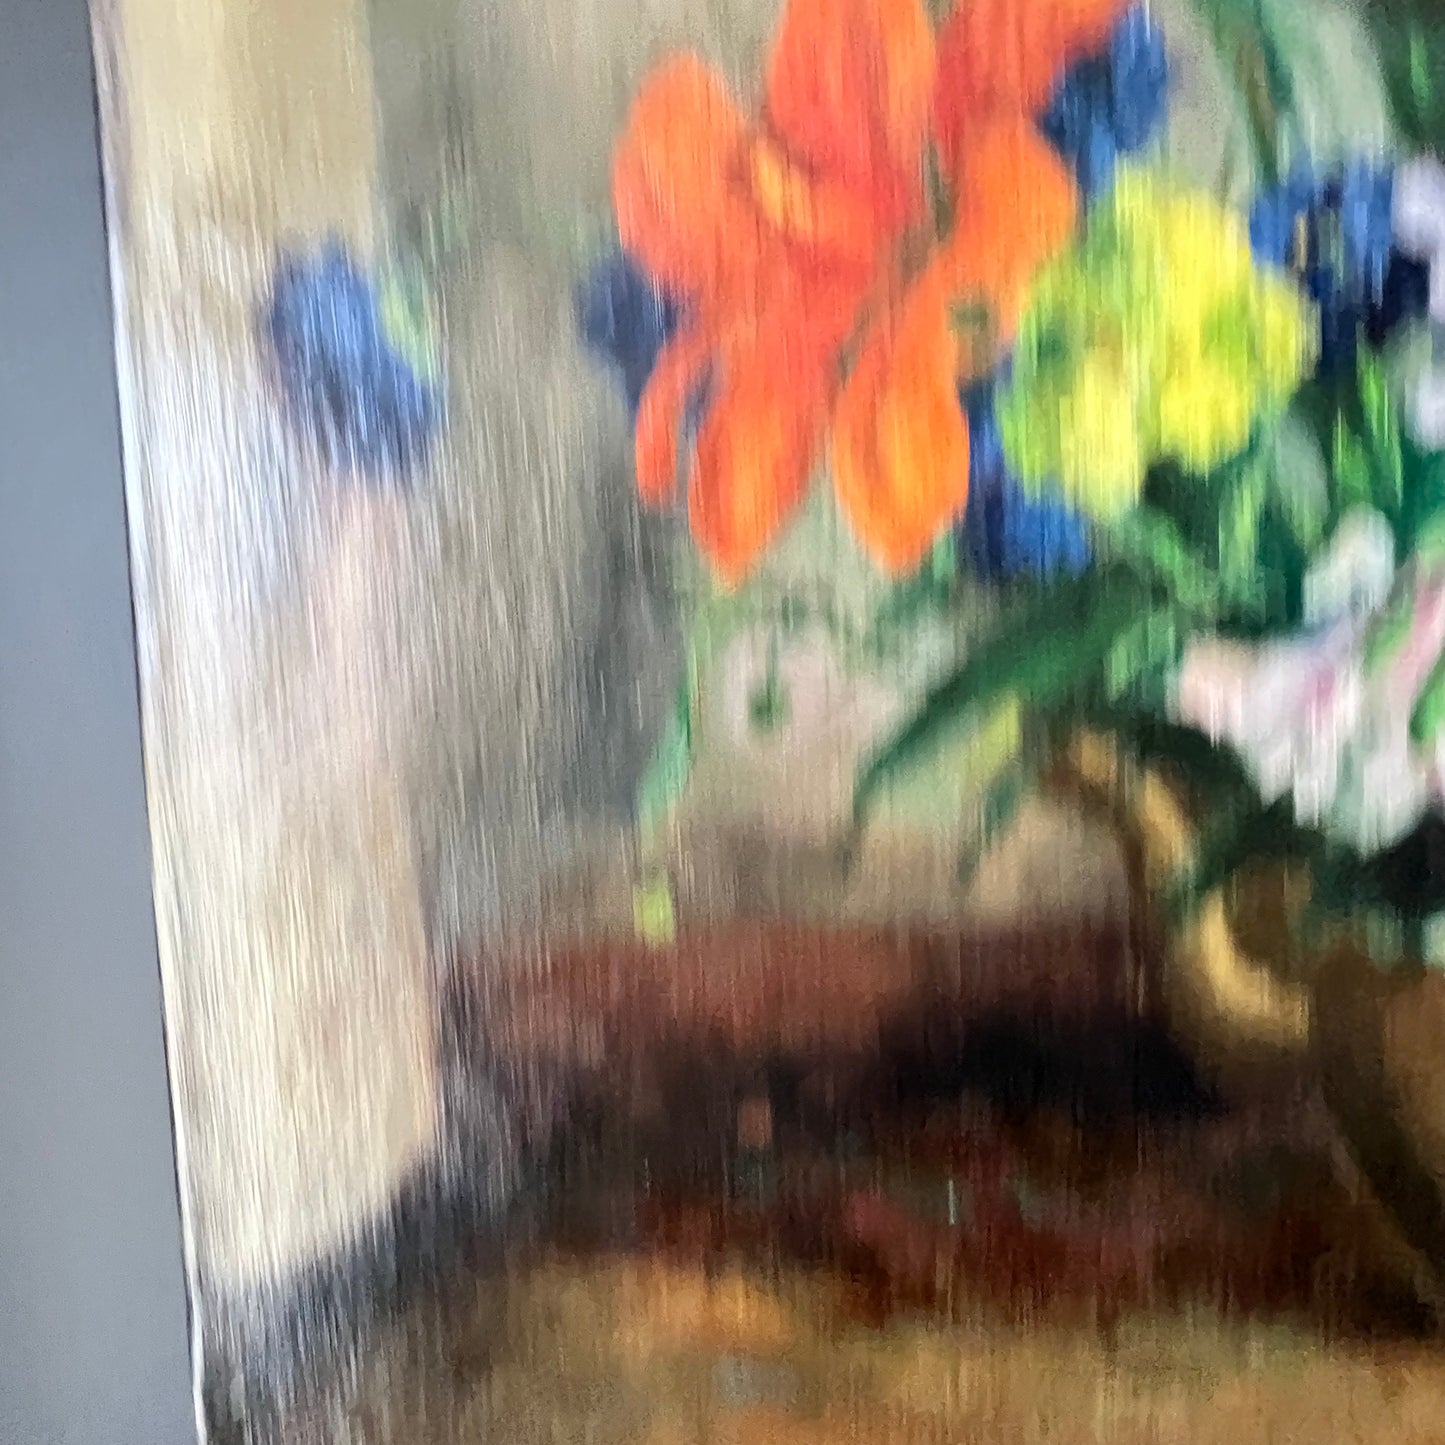 Vintage Oil Painting Still Life of Vibrant Blooms in Kettle